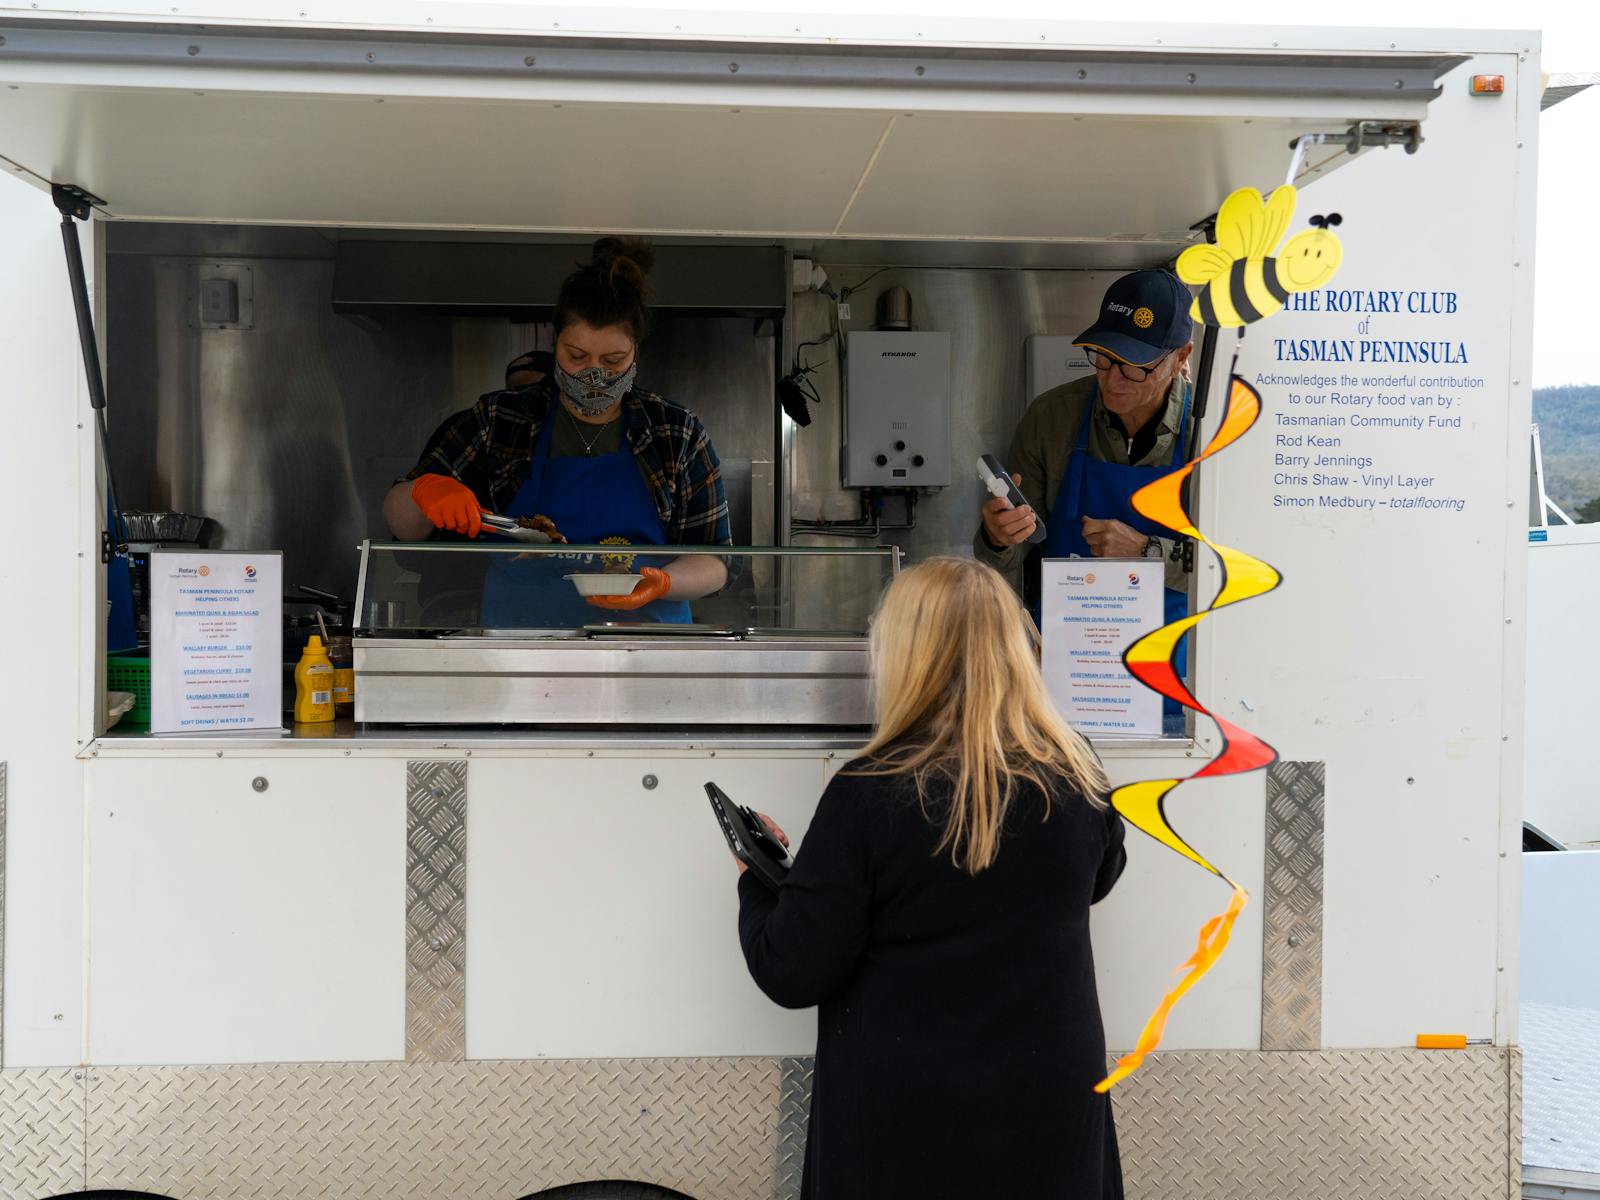 Two Rotarians inside the Rotary van serving up yummy food to a lady enjoying the fine food on offer